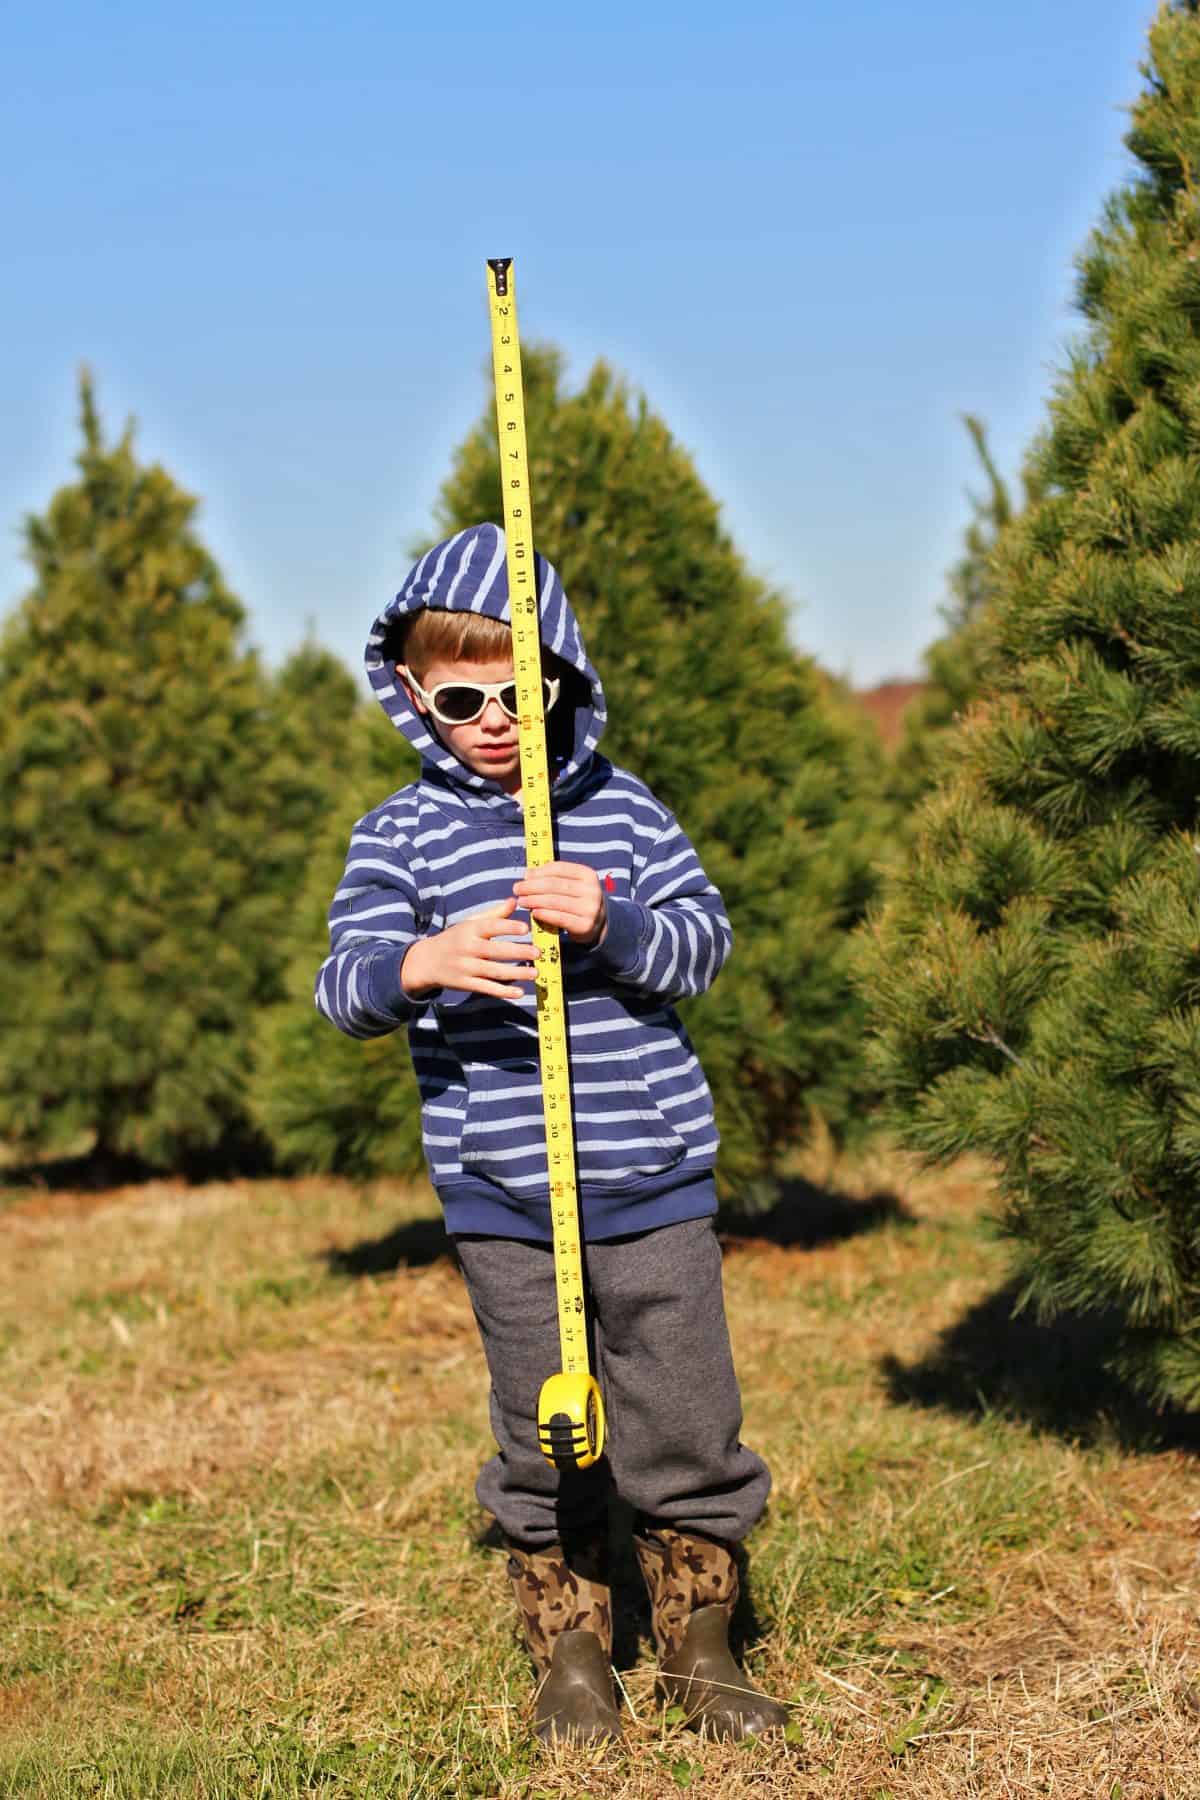 Tips for cutting down your own Christmas tree with kids